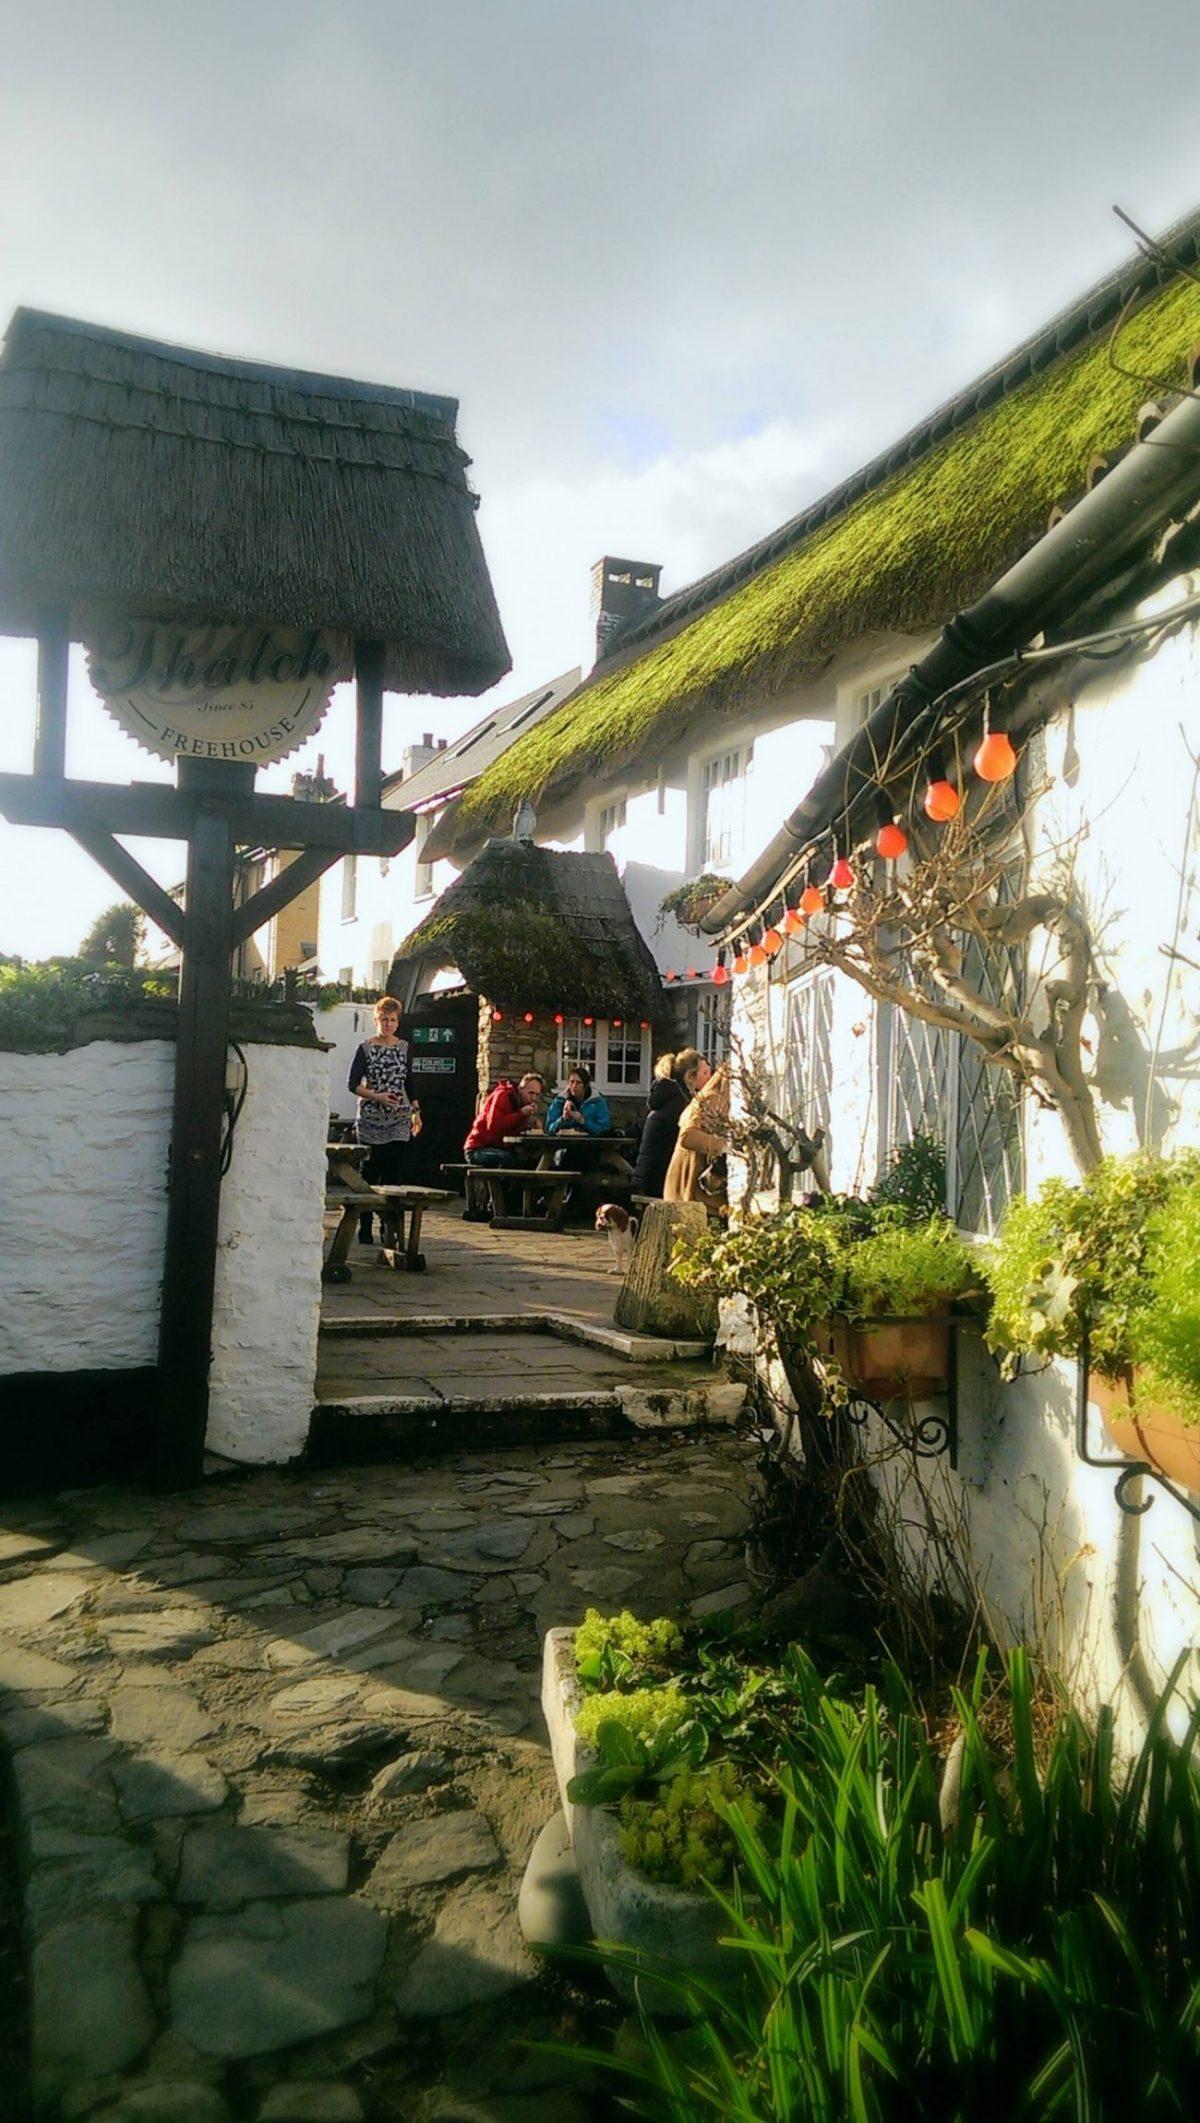 Croyde Cottages and Clotted Cream - A Coastal Walk in Devon - Cottages and Pubs